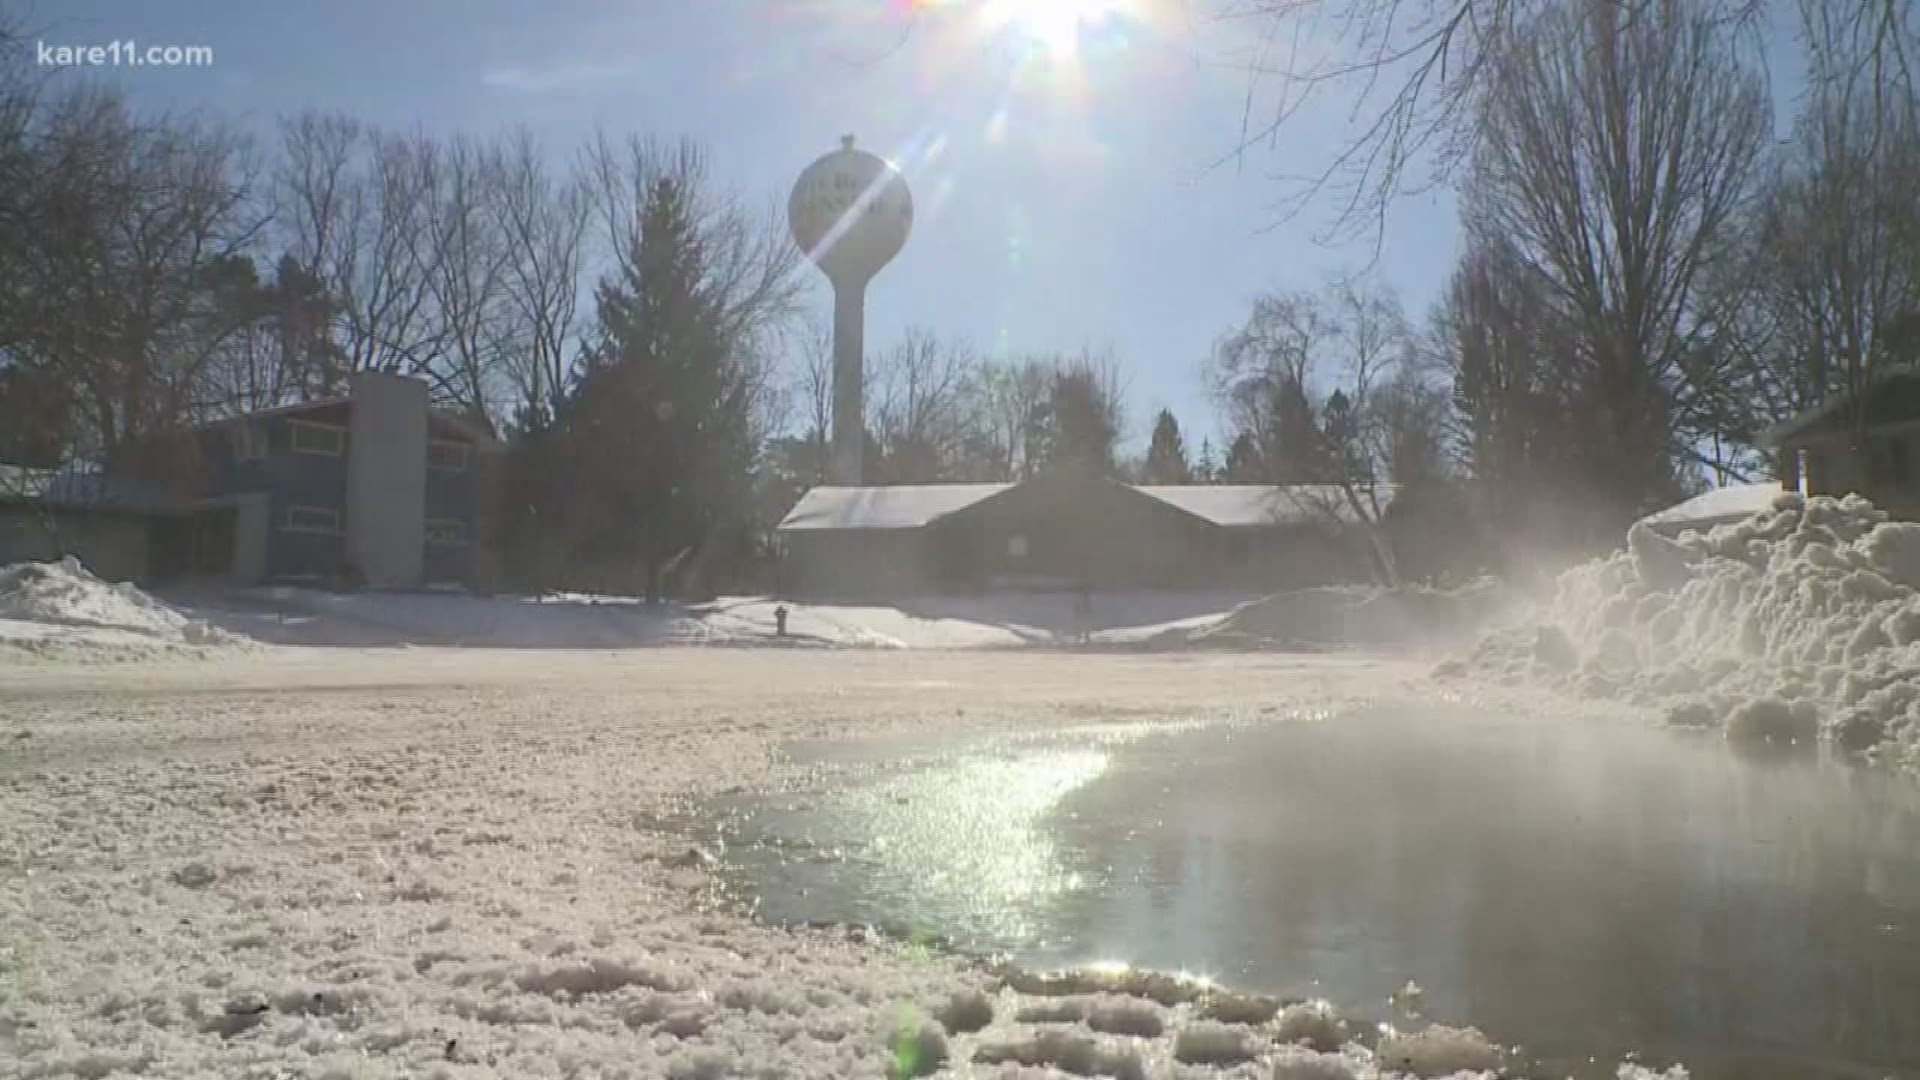 There's a whole lot of ice in White Bear Township after a malfunction with one of the community's water towers sent more than 100,000 gallons spilling to the ground. https://kare11.tv/2HCUWAz